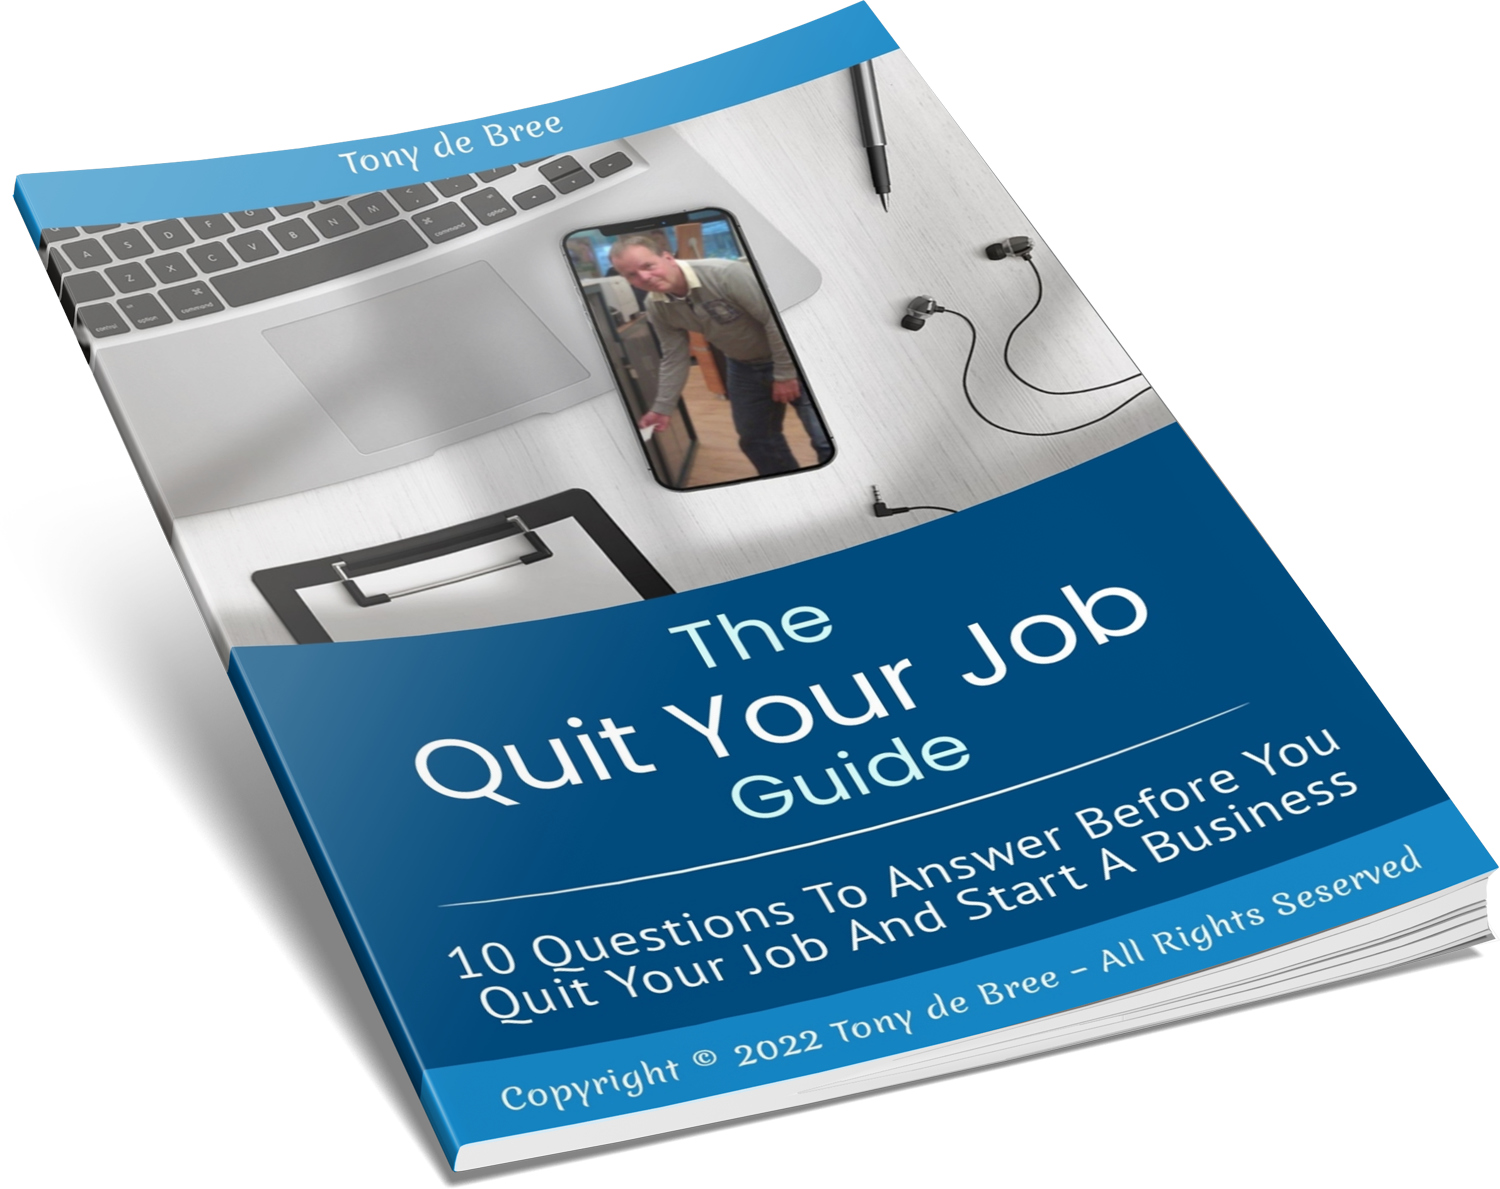 10 Questions To Answer Before You Quit Your Job And Start A Business by Tony de Bree